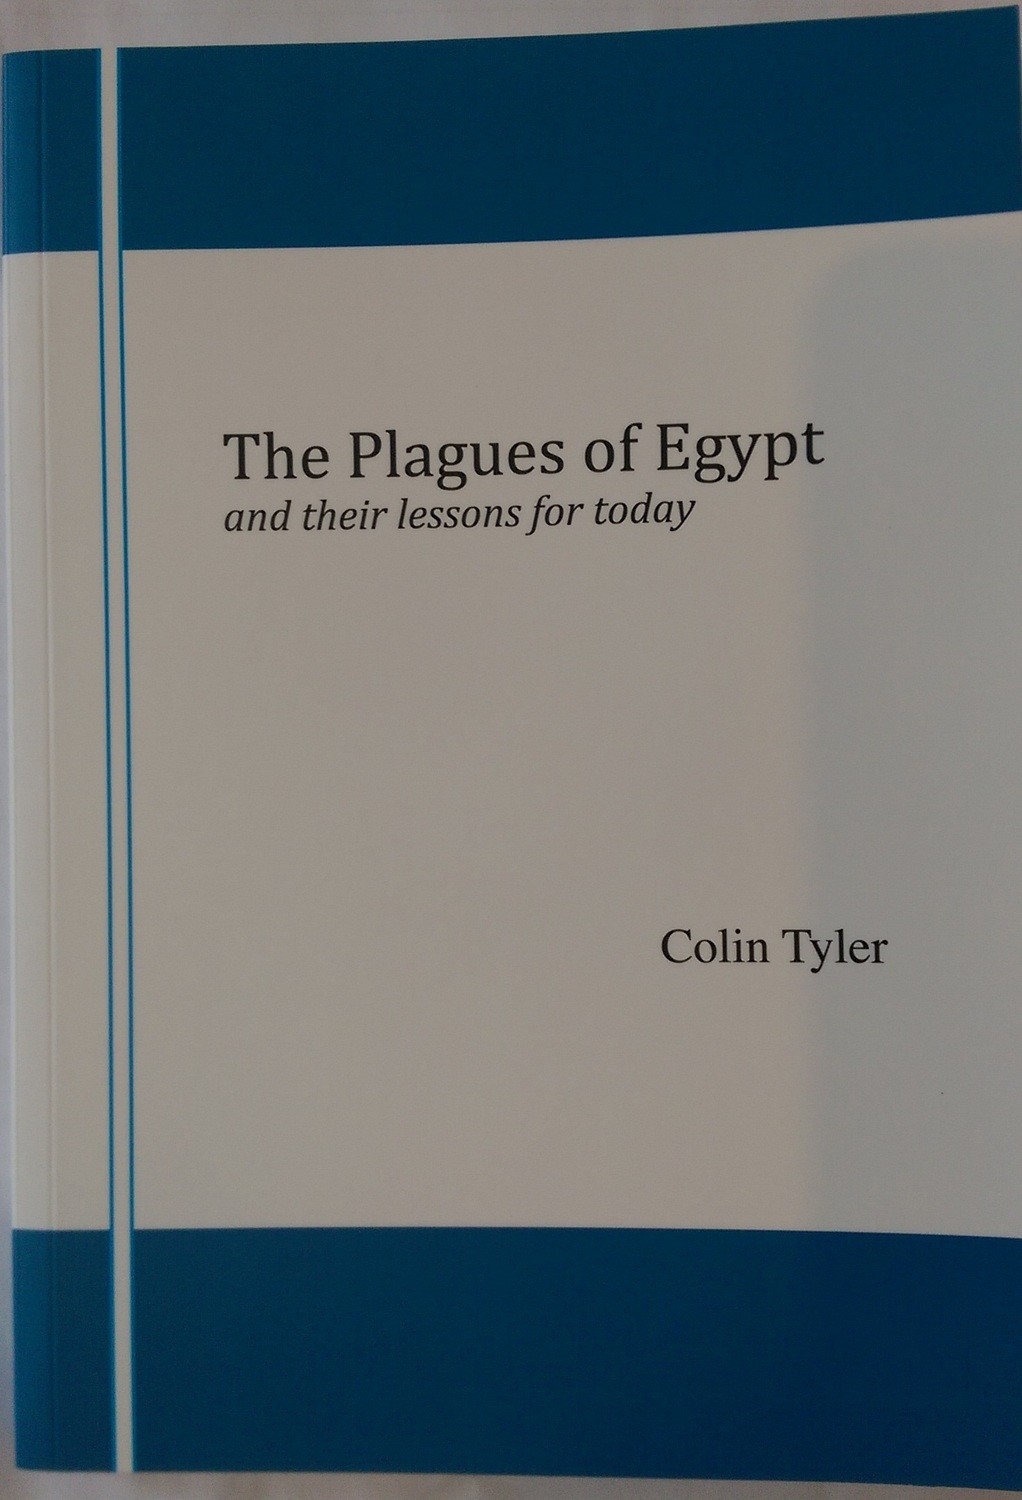 The Plagues of Egypt: and their lessons for today by Colin Tyler